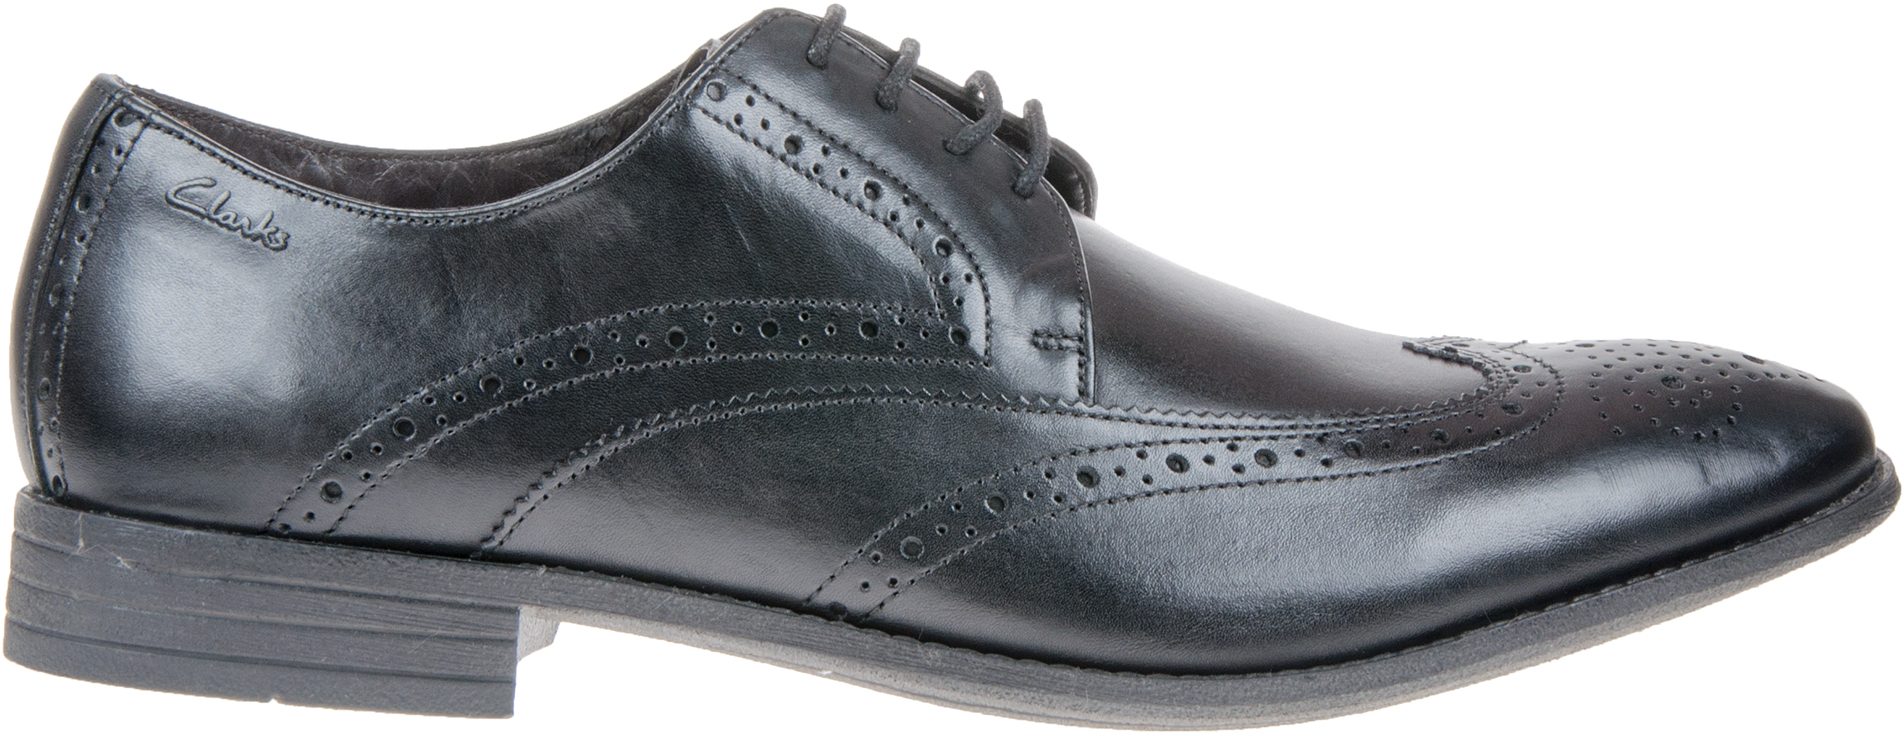 Clarks Chart Limit Black Leather 20355013 - Formal Shoes - Humphries Shoes